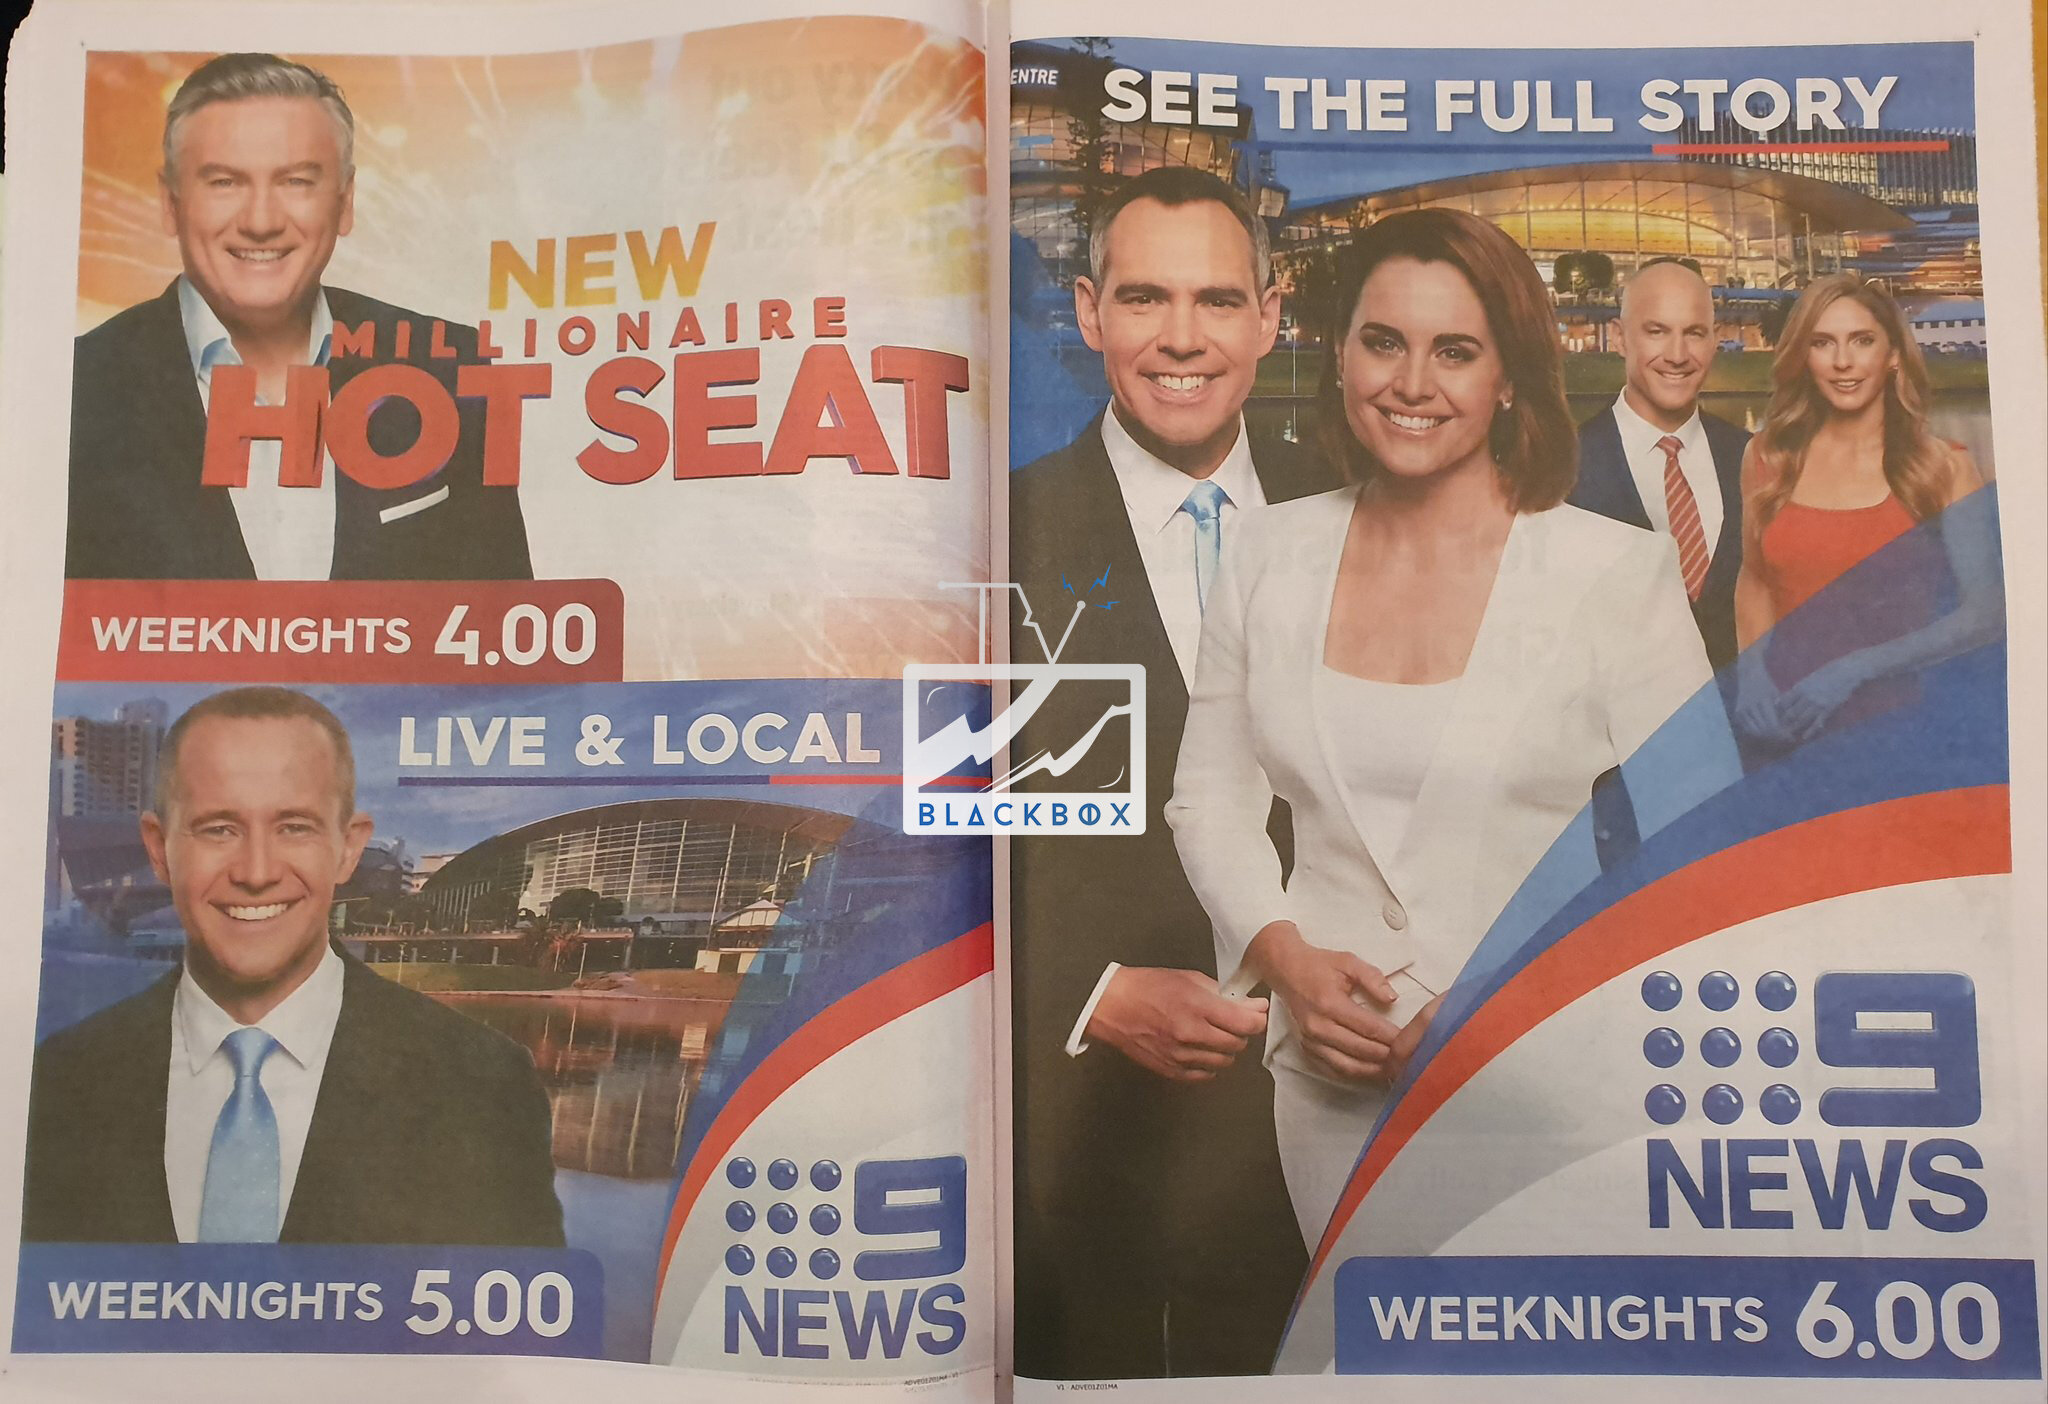  The programming announcement appeared as a two-page ad in  The Sunday Mail  